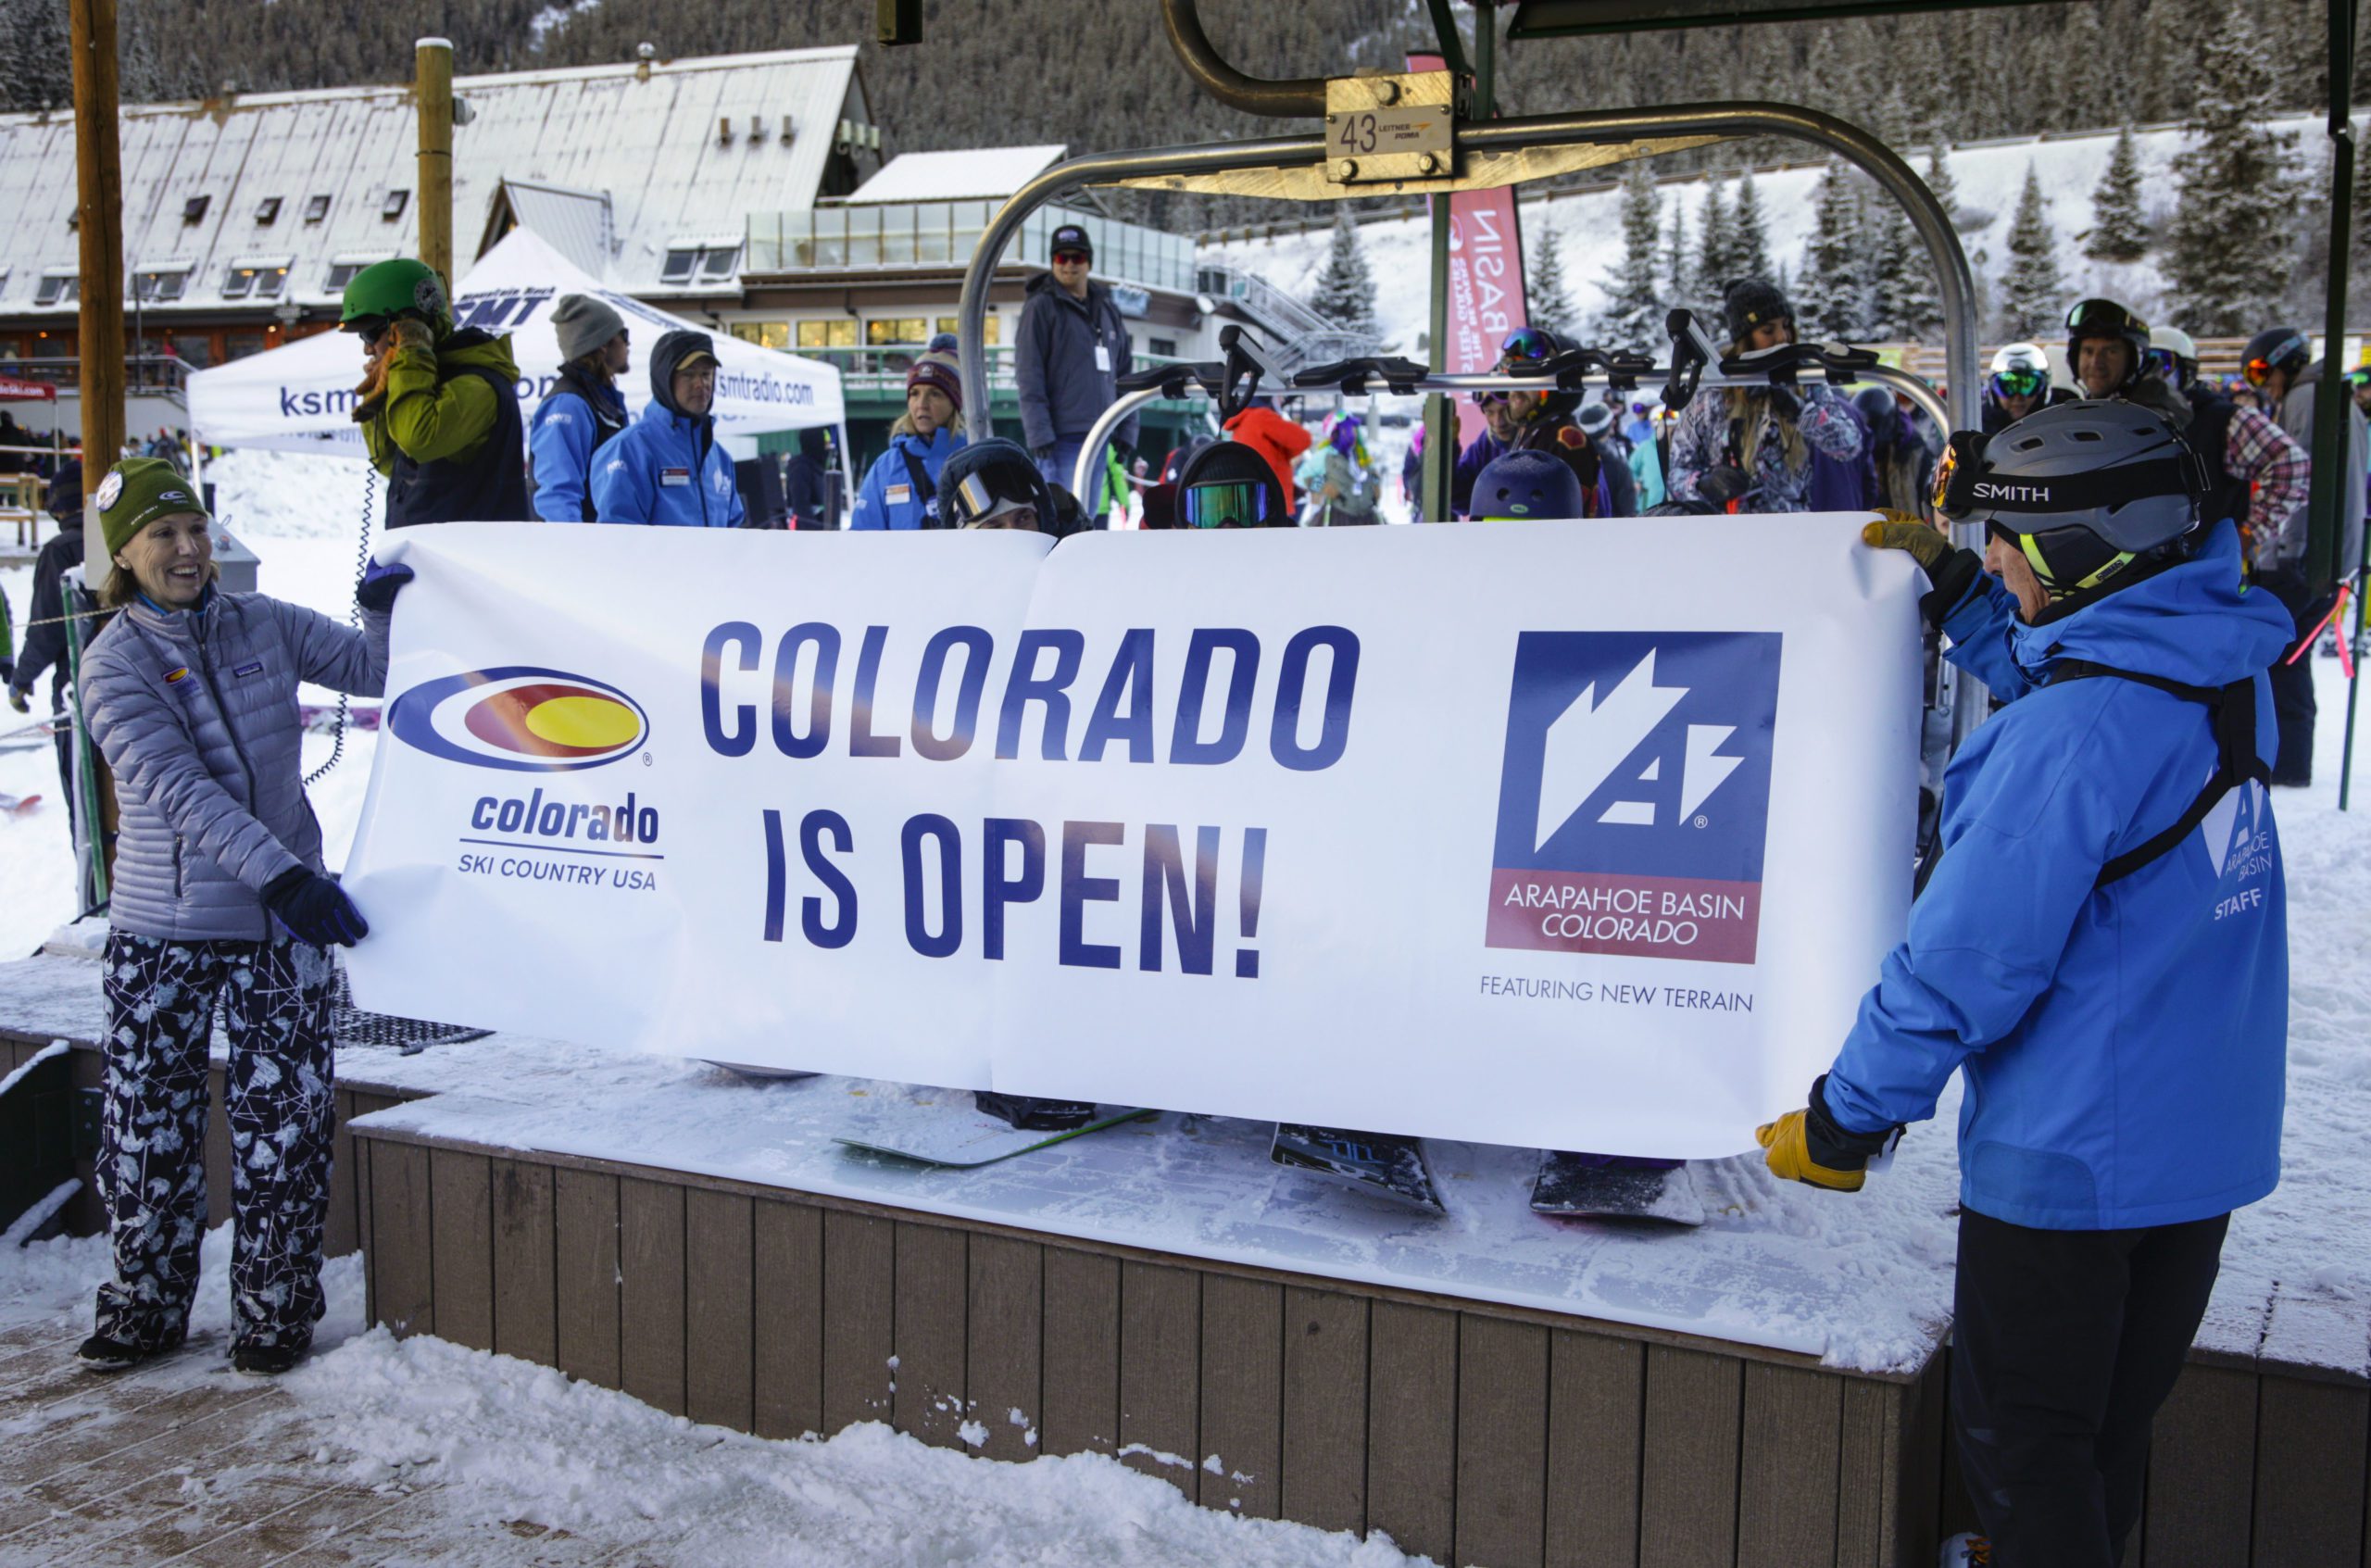 A-Basin Opening Day Banner Colorado Ski Country Jack Dempsey